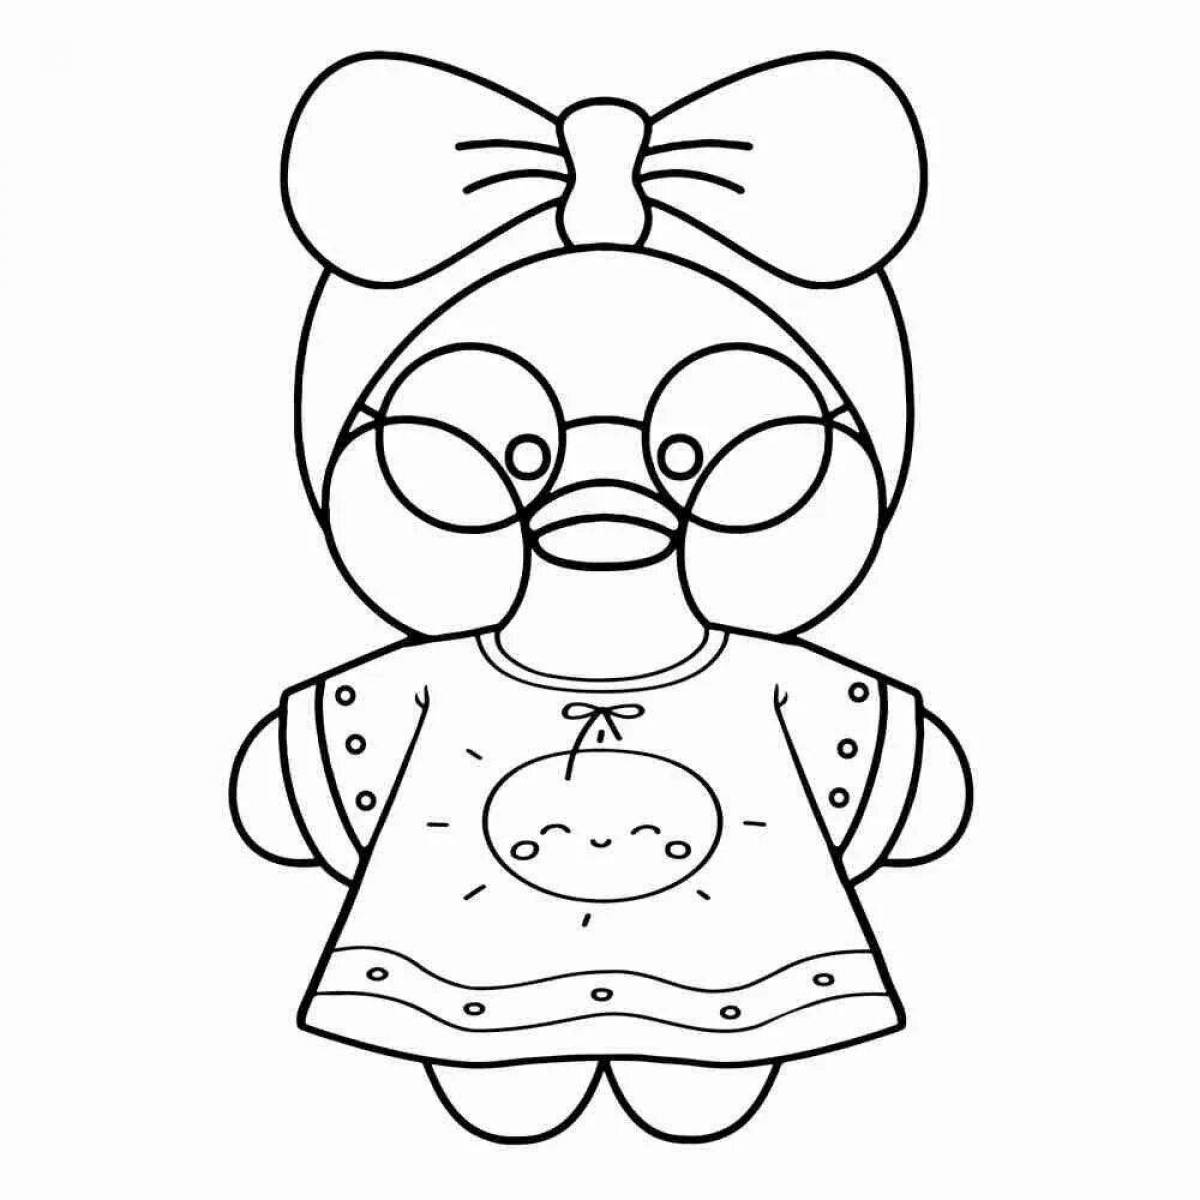 Colored luminous coloring book for girls lalafanfan duck with clothes